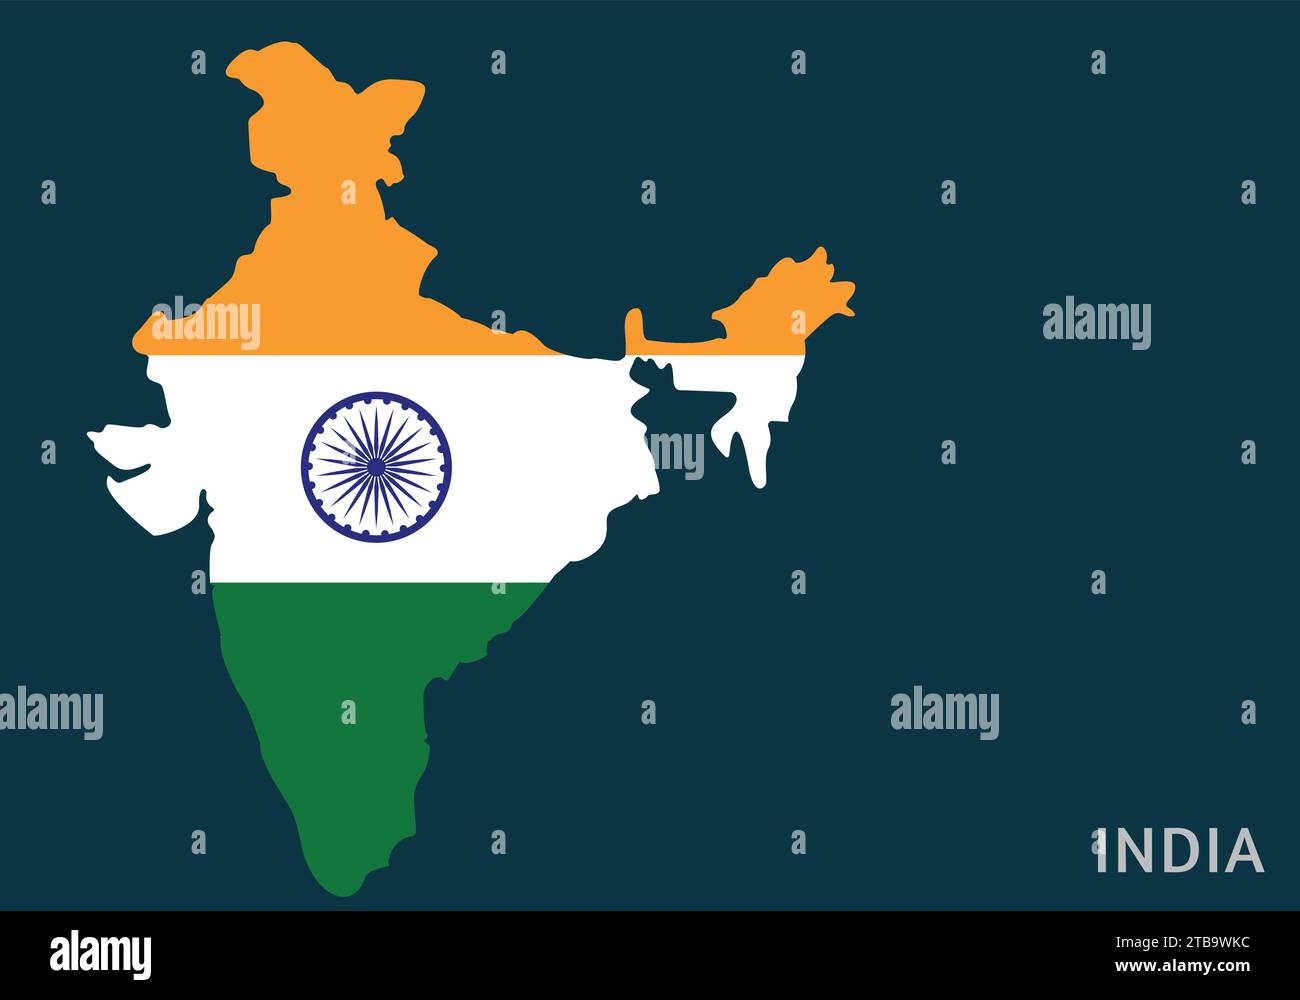 India map with Indian flag vector illustration Stock Vector